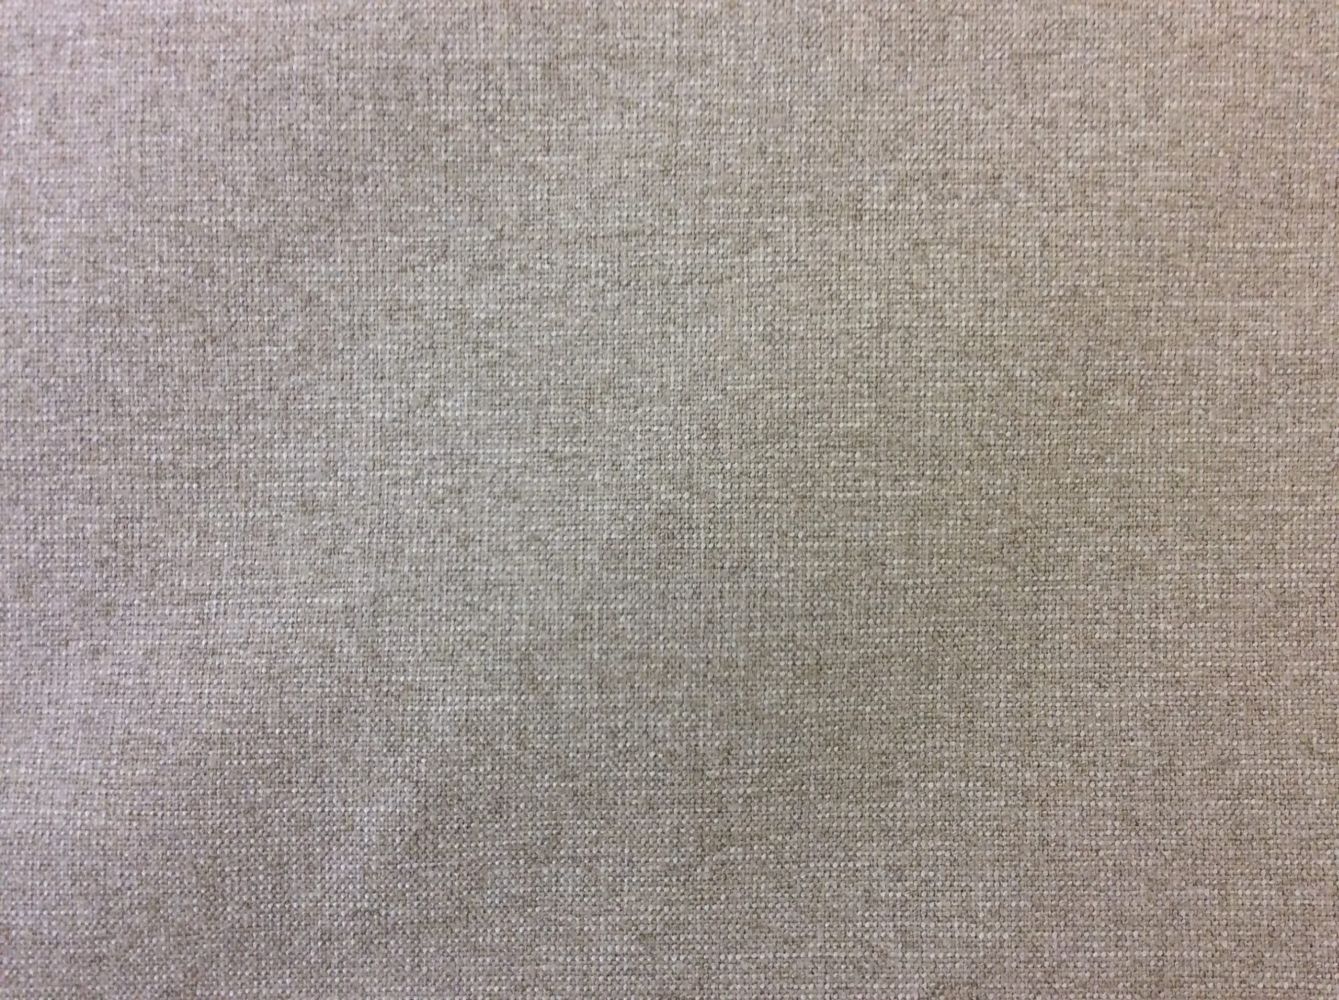 Linen Upholstery Fabric / Linen fabric, made from the fibers of the ...